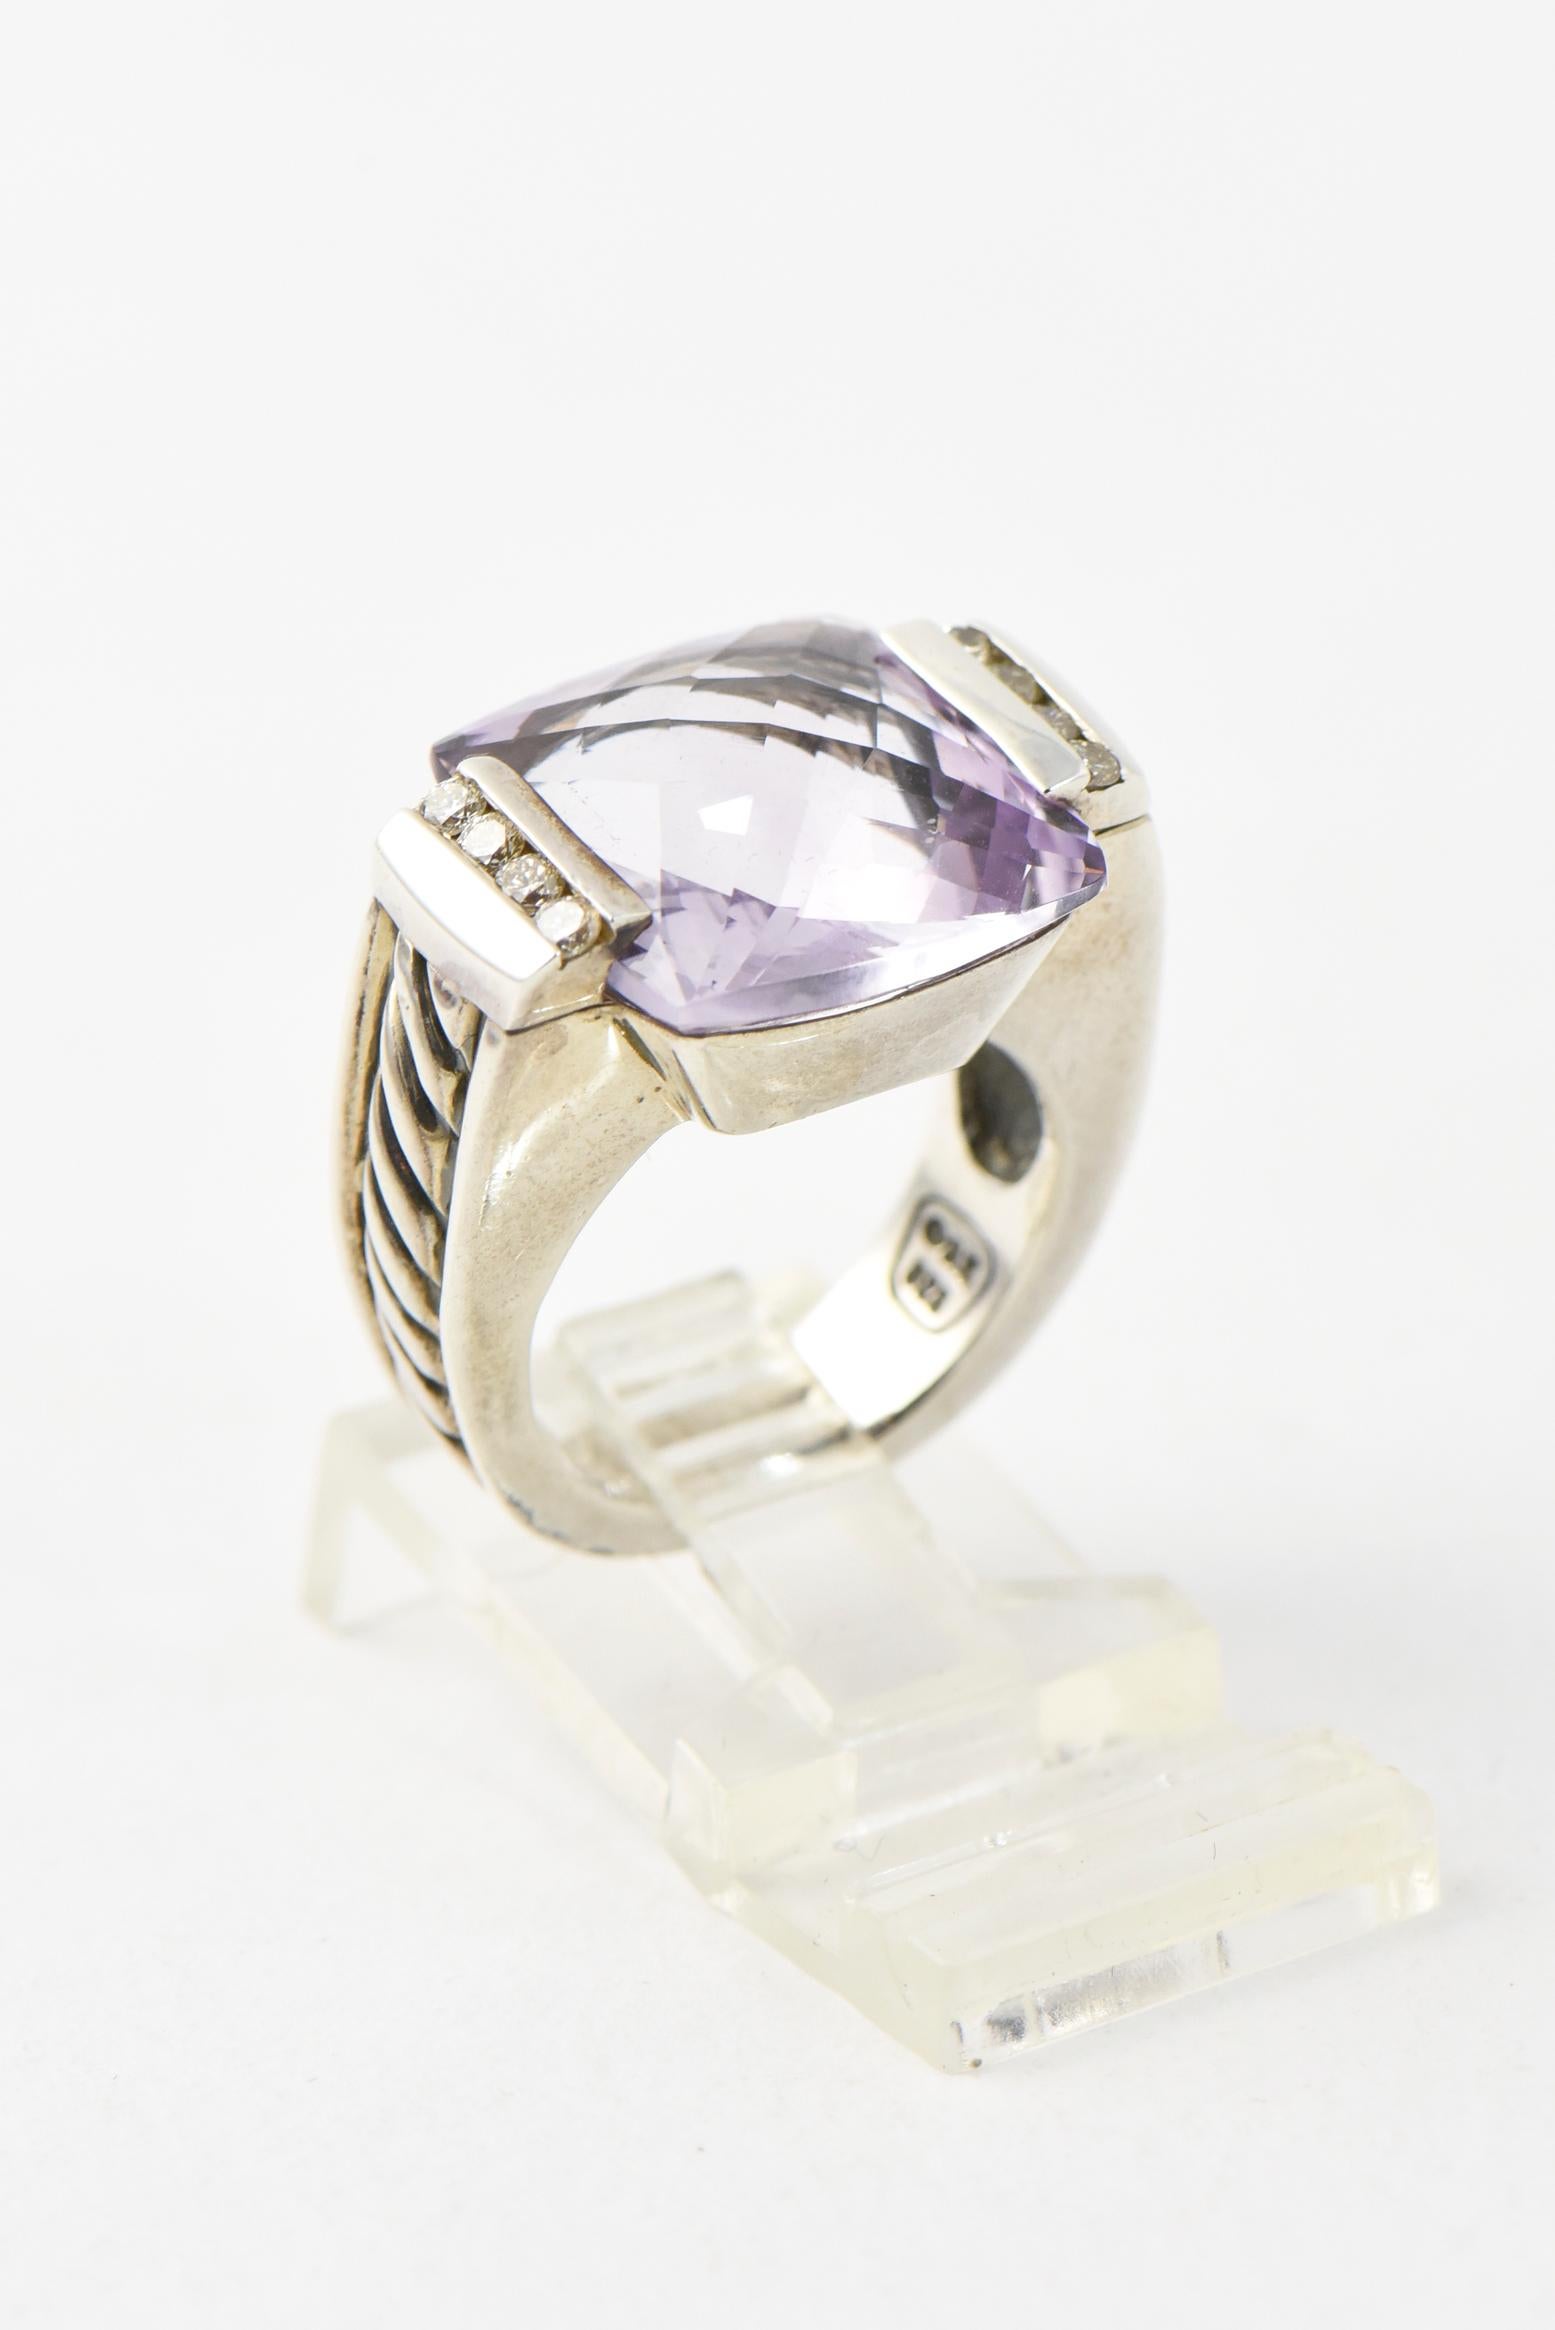 David Yurman sterling silver cocktail ring from the Deco collection. Features a cushion-shaped amethyst  center with channel-set round brilliant diamonds at sides and cable motif throughout shank. 
Size: 5.5
Hallmarked: 585, 925 along with brand